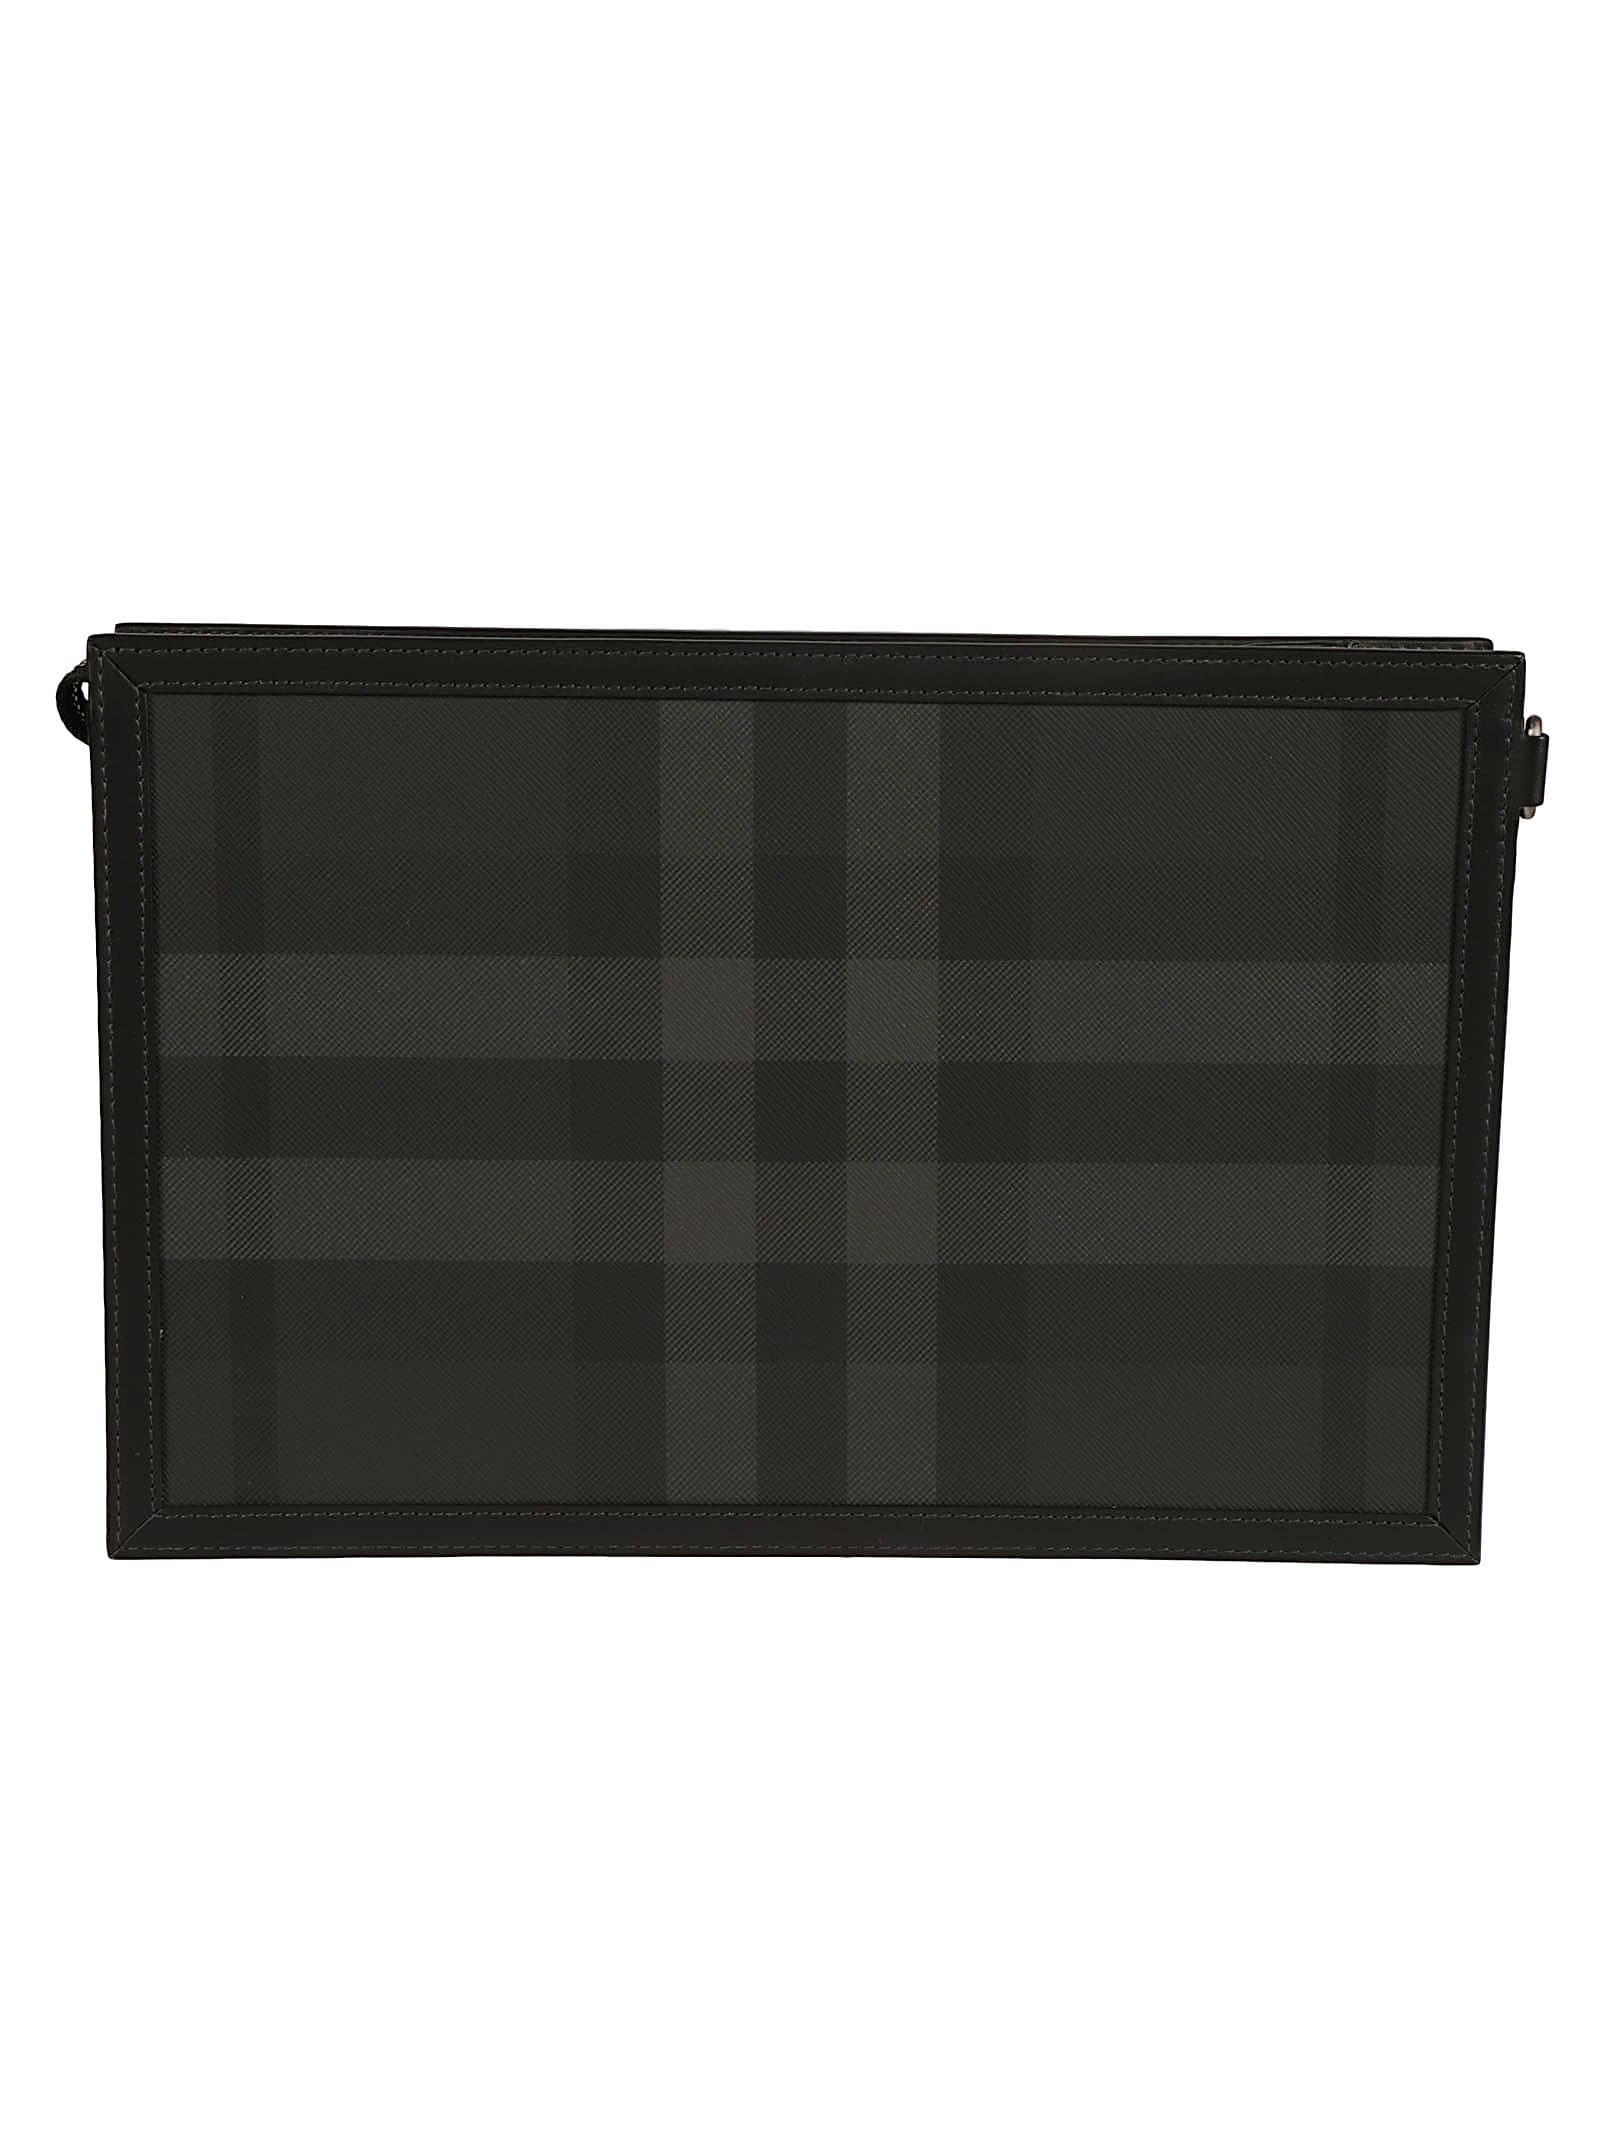 Shop Burberry Frame Pouch In Charcoal